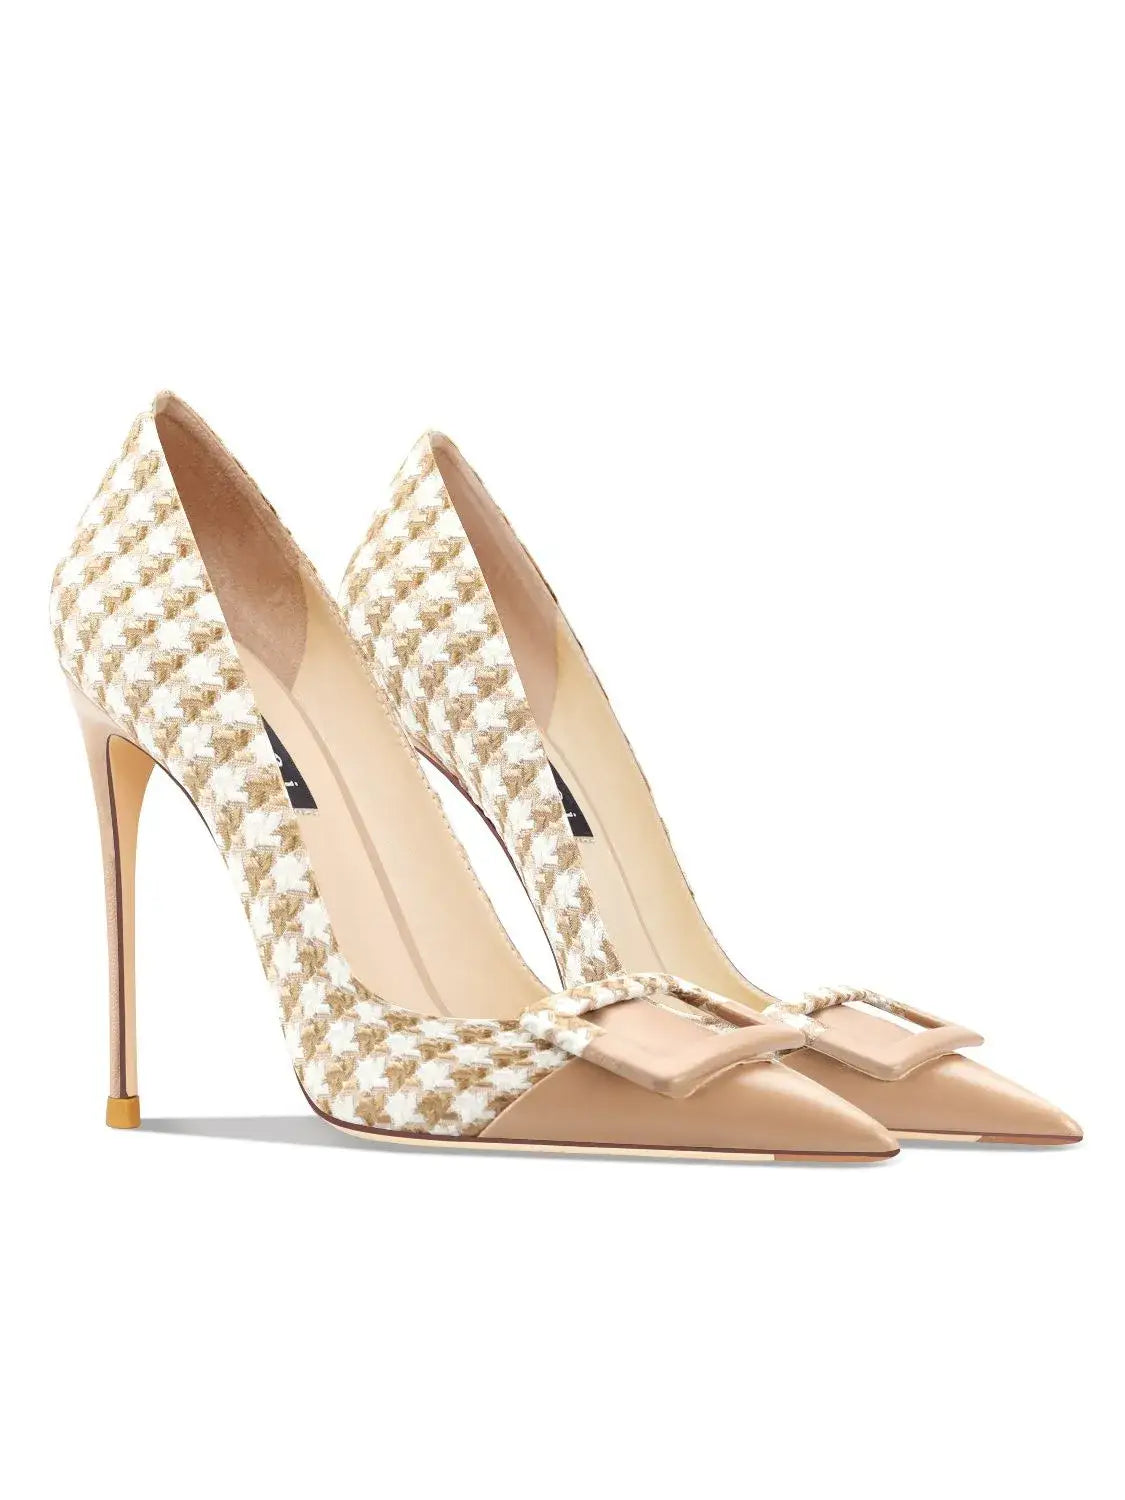 Party pointy high heels pumps - nude 6 cm / 33 / e